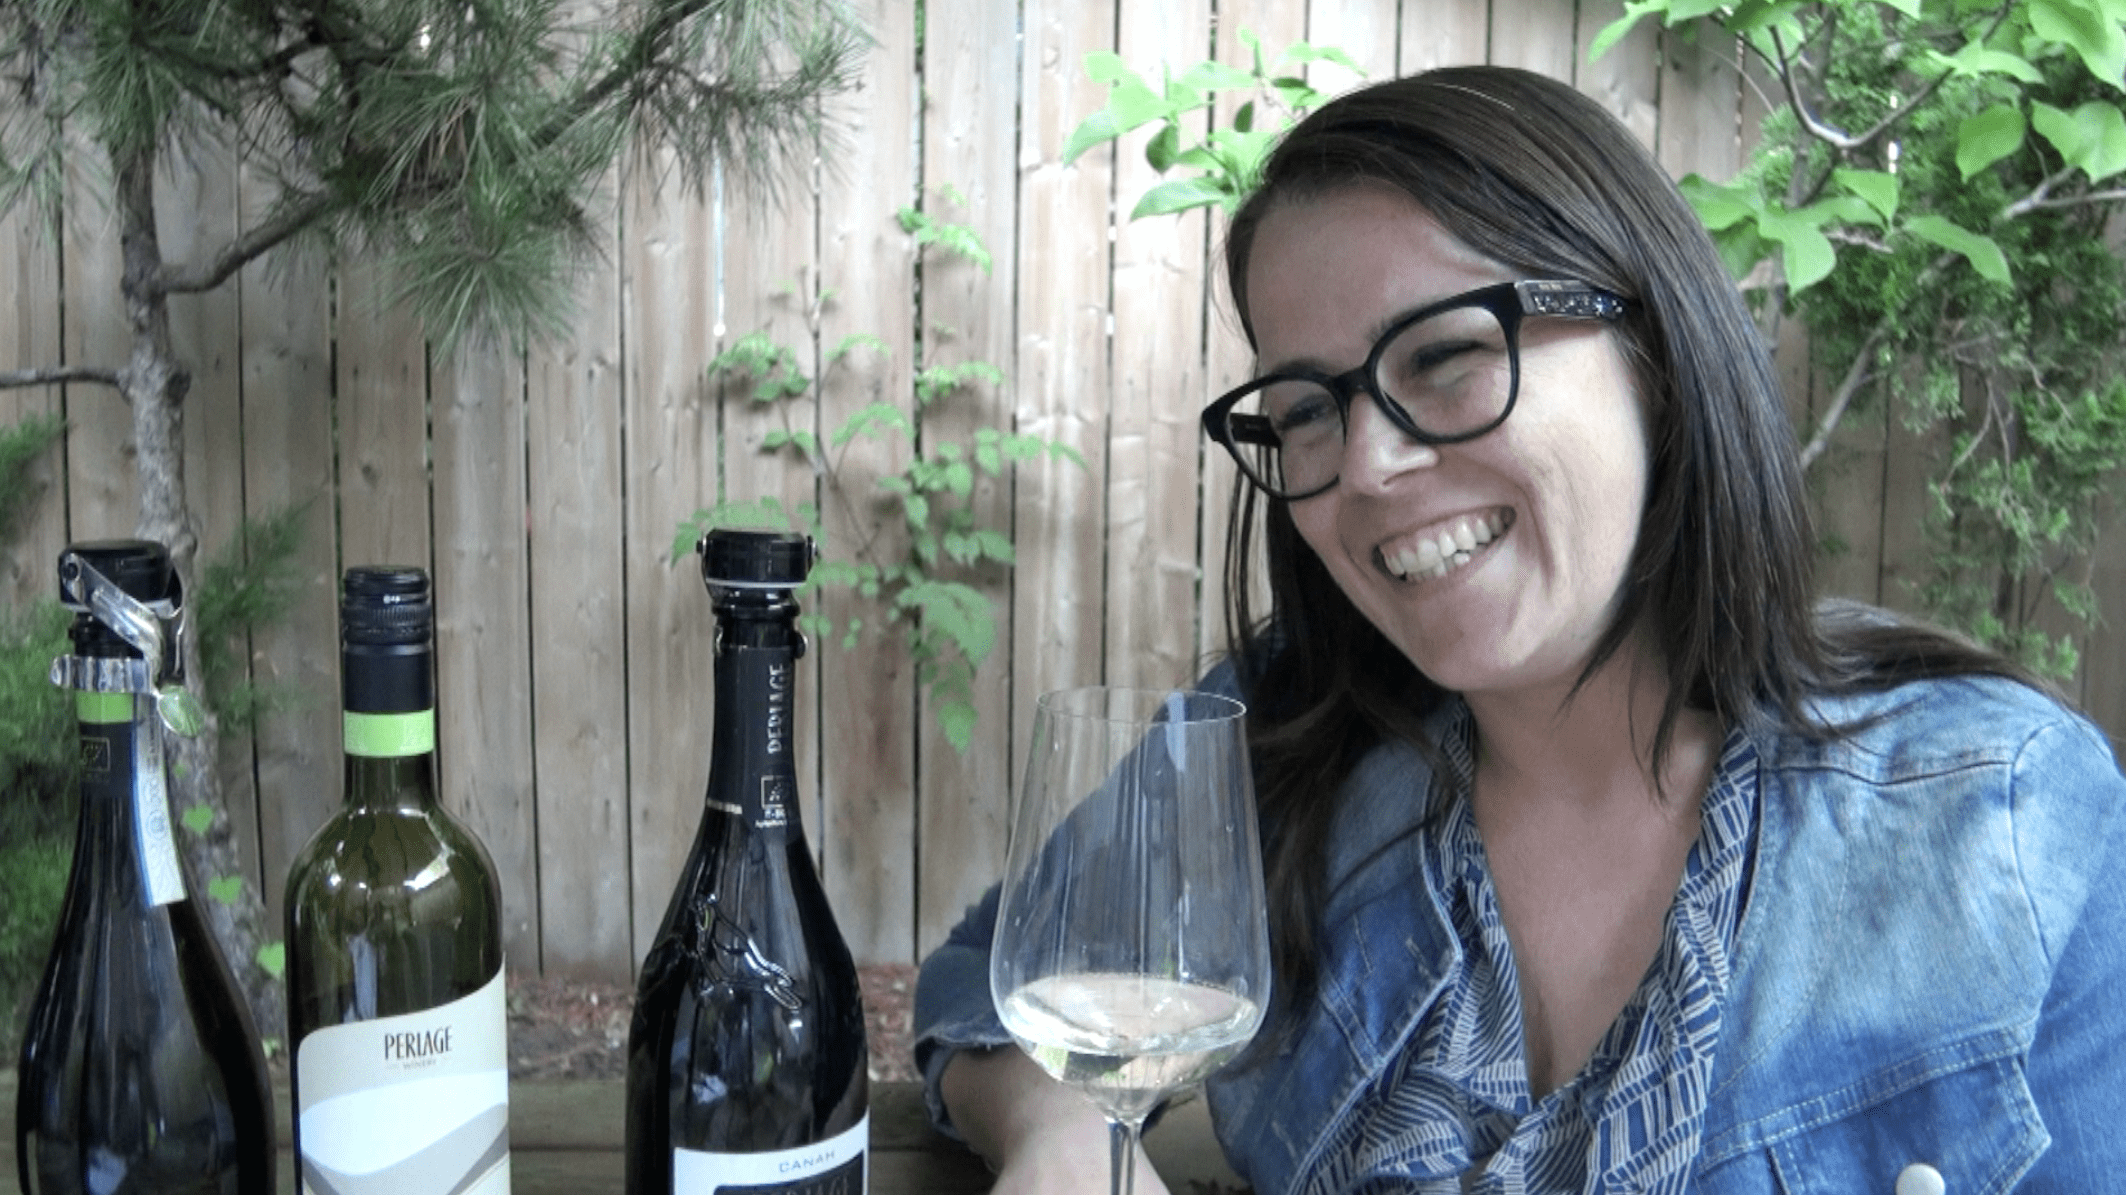 A Perfect Summer Afternoon Sipping Perlage Prosecco With Elena Brugnera Muraro